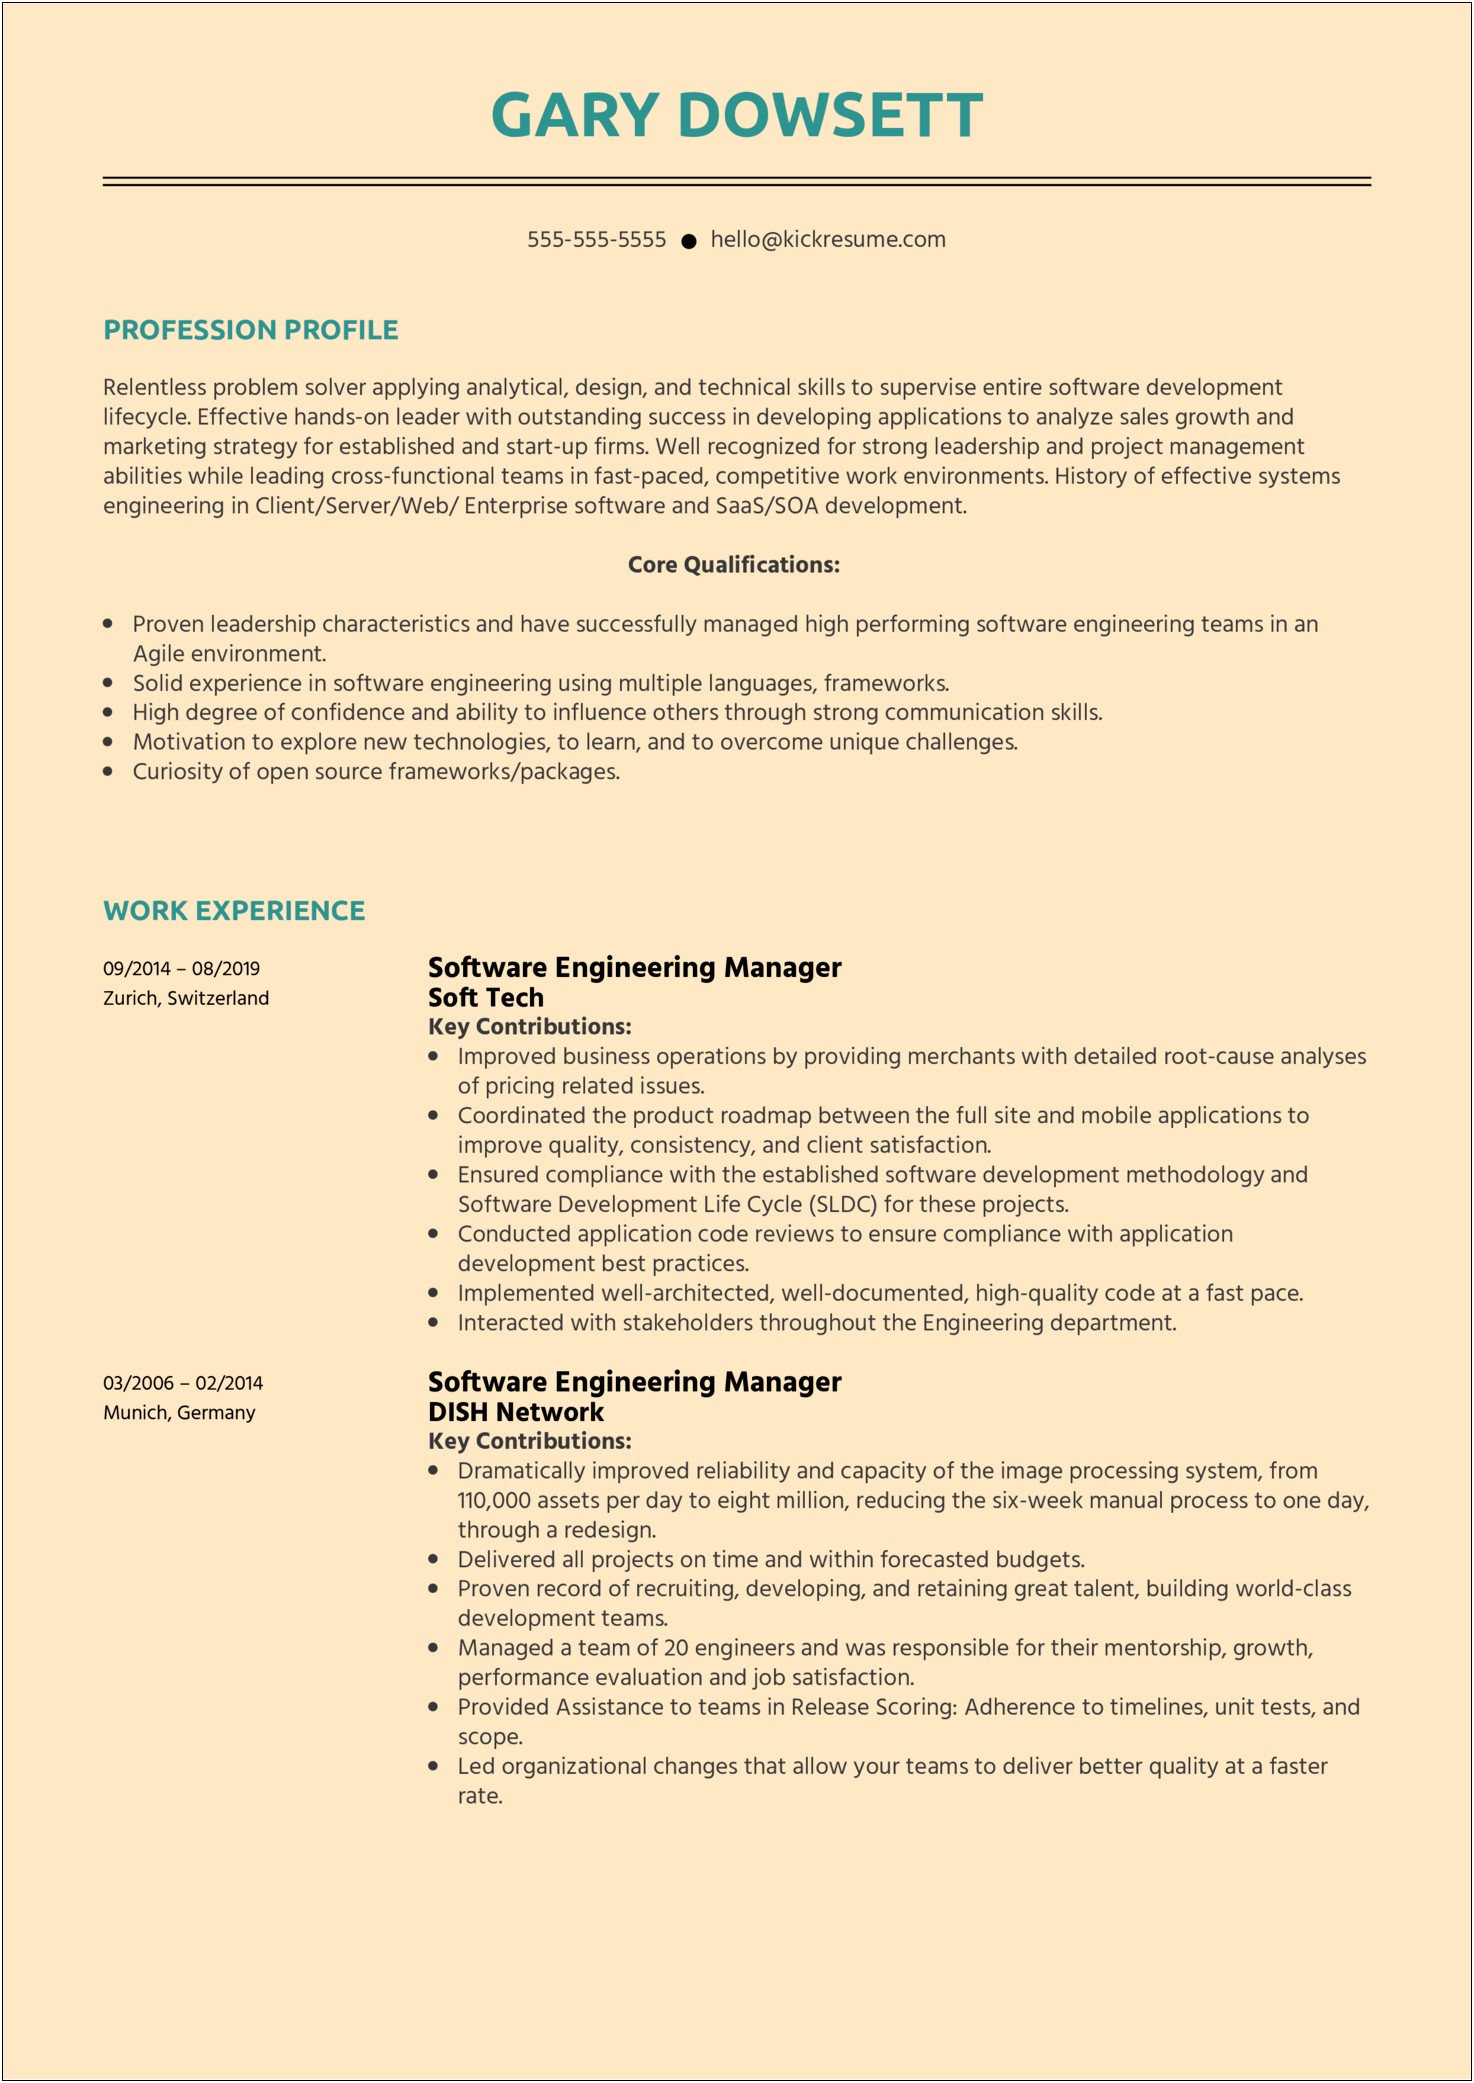 Customer Management Software Experience Resume